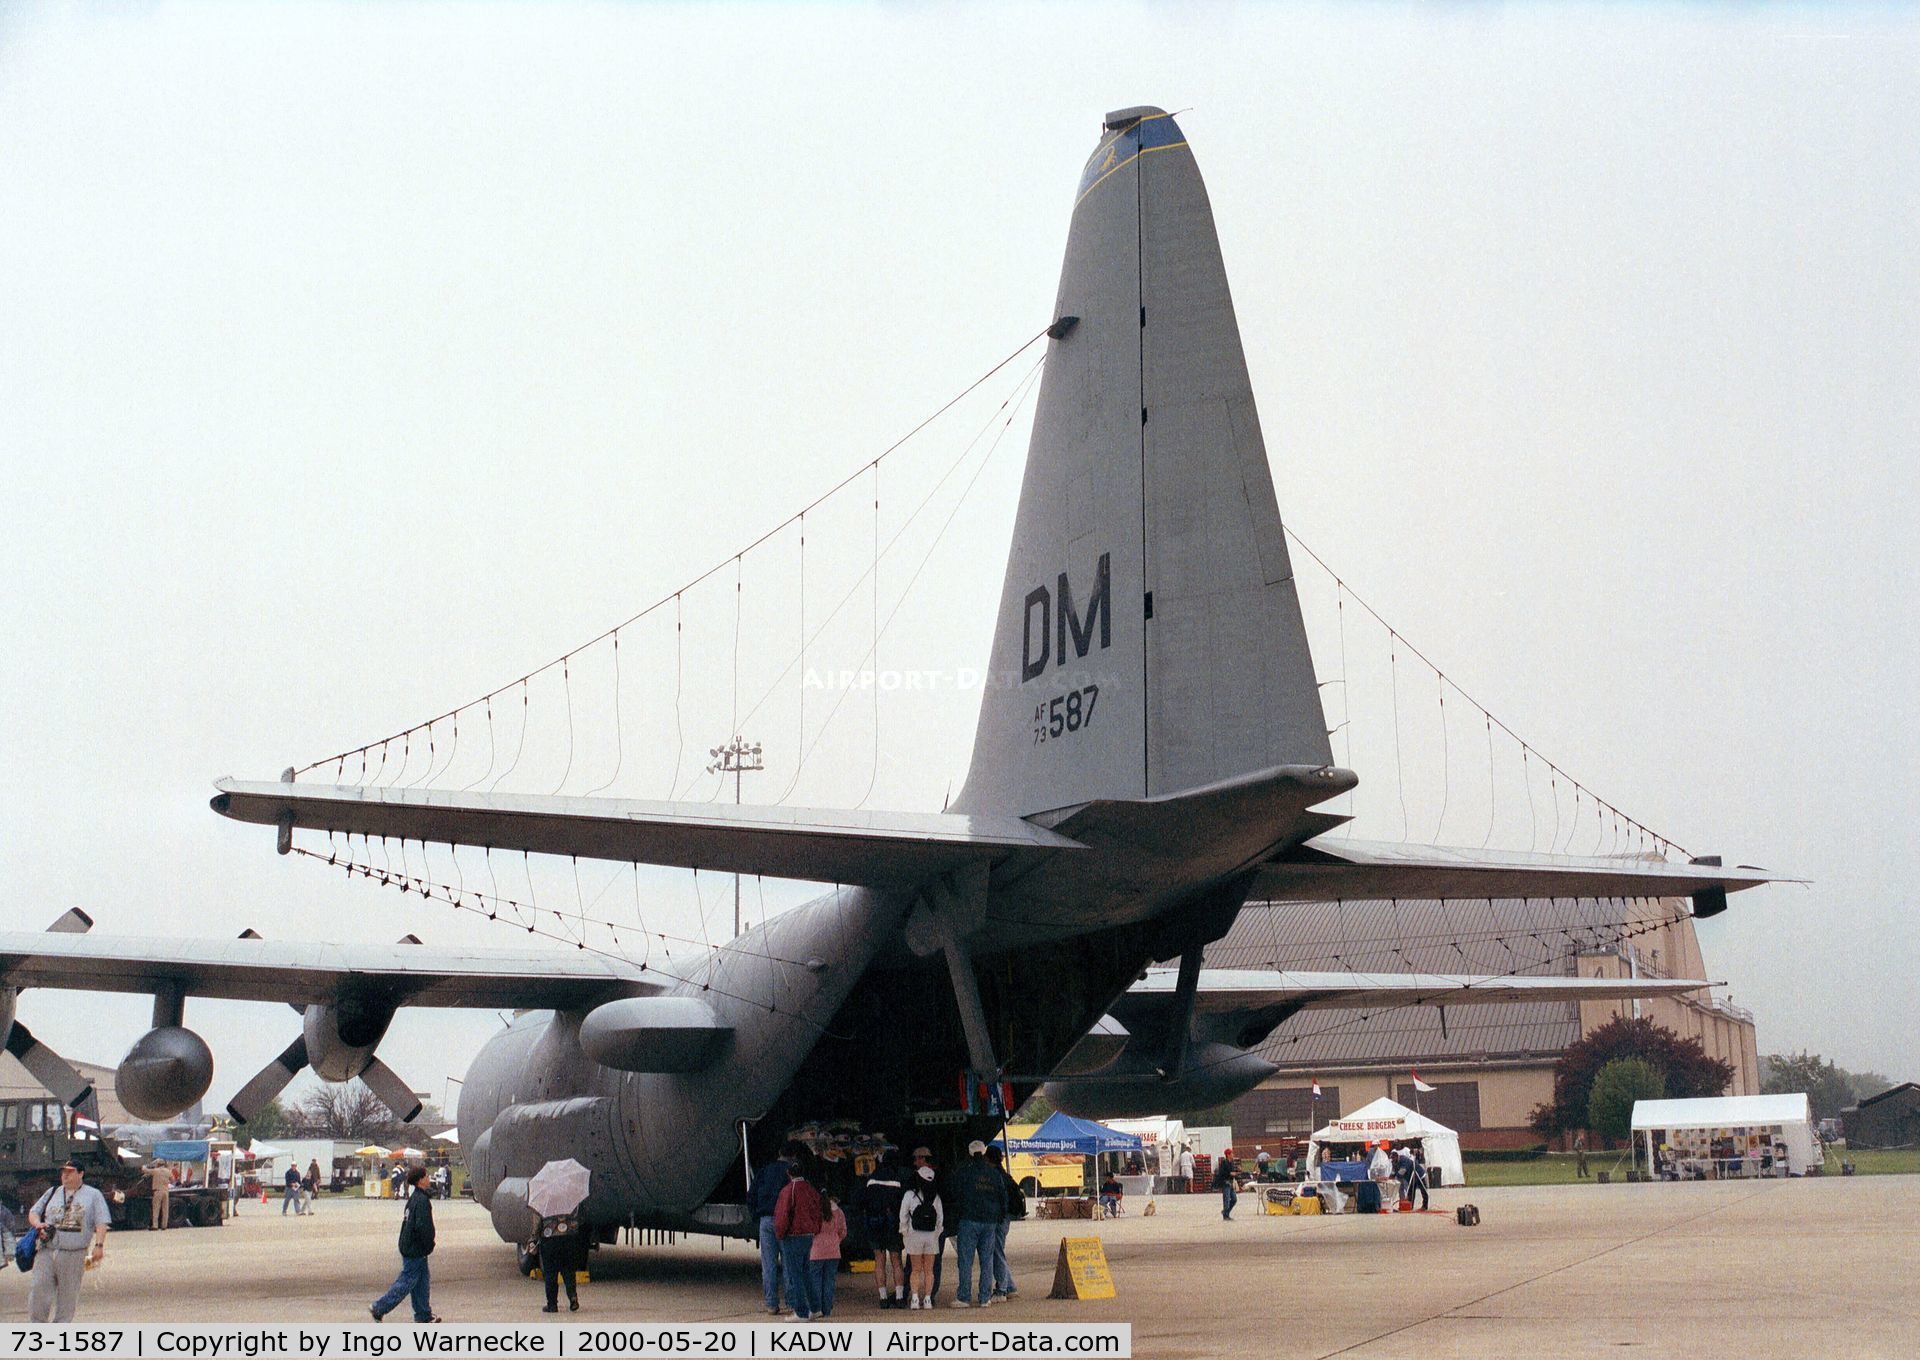 73-1587, 1973 Lockheed EC-130H Compass Call C/N 382-4549, Lockheed EC-130H Hercules of the USAF at Andrews AFB during Armed Forces Day